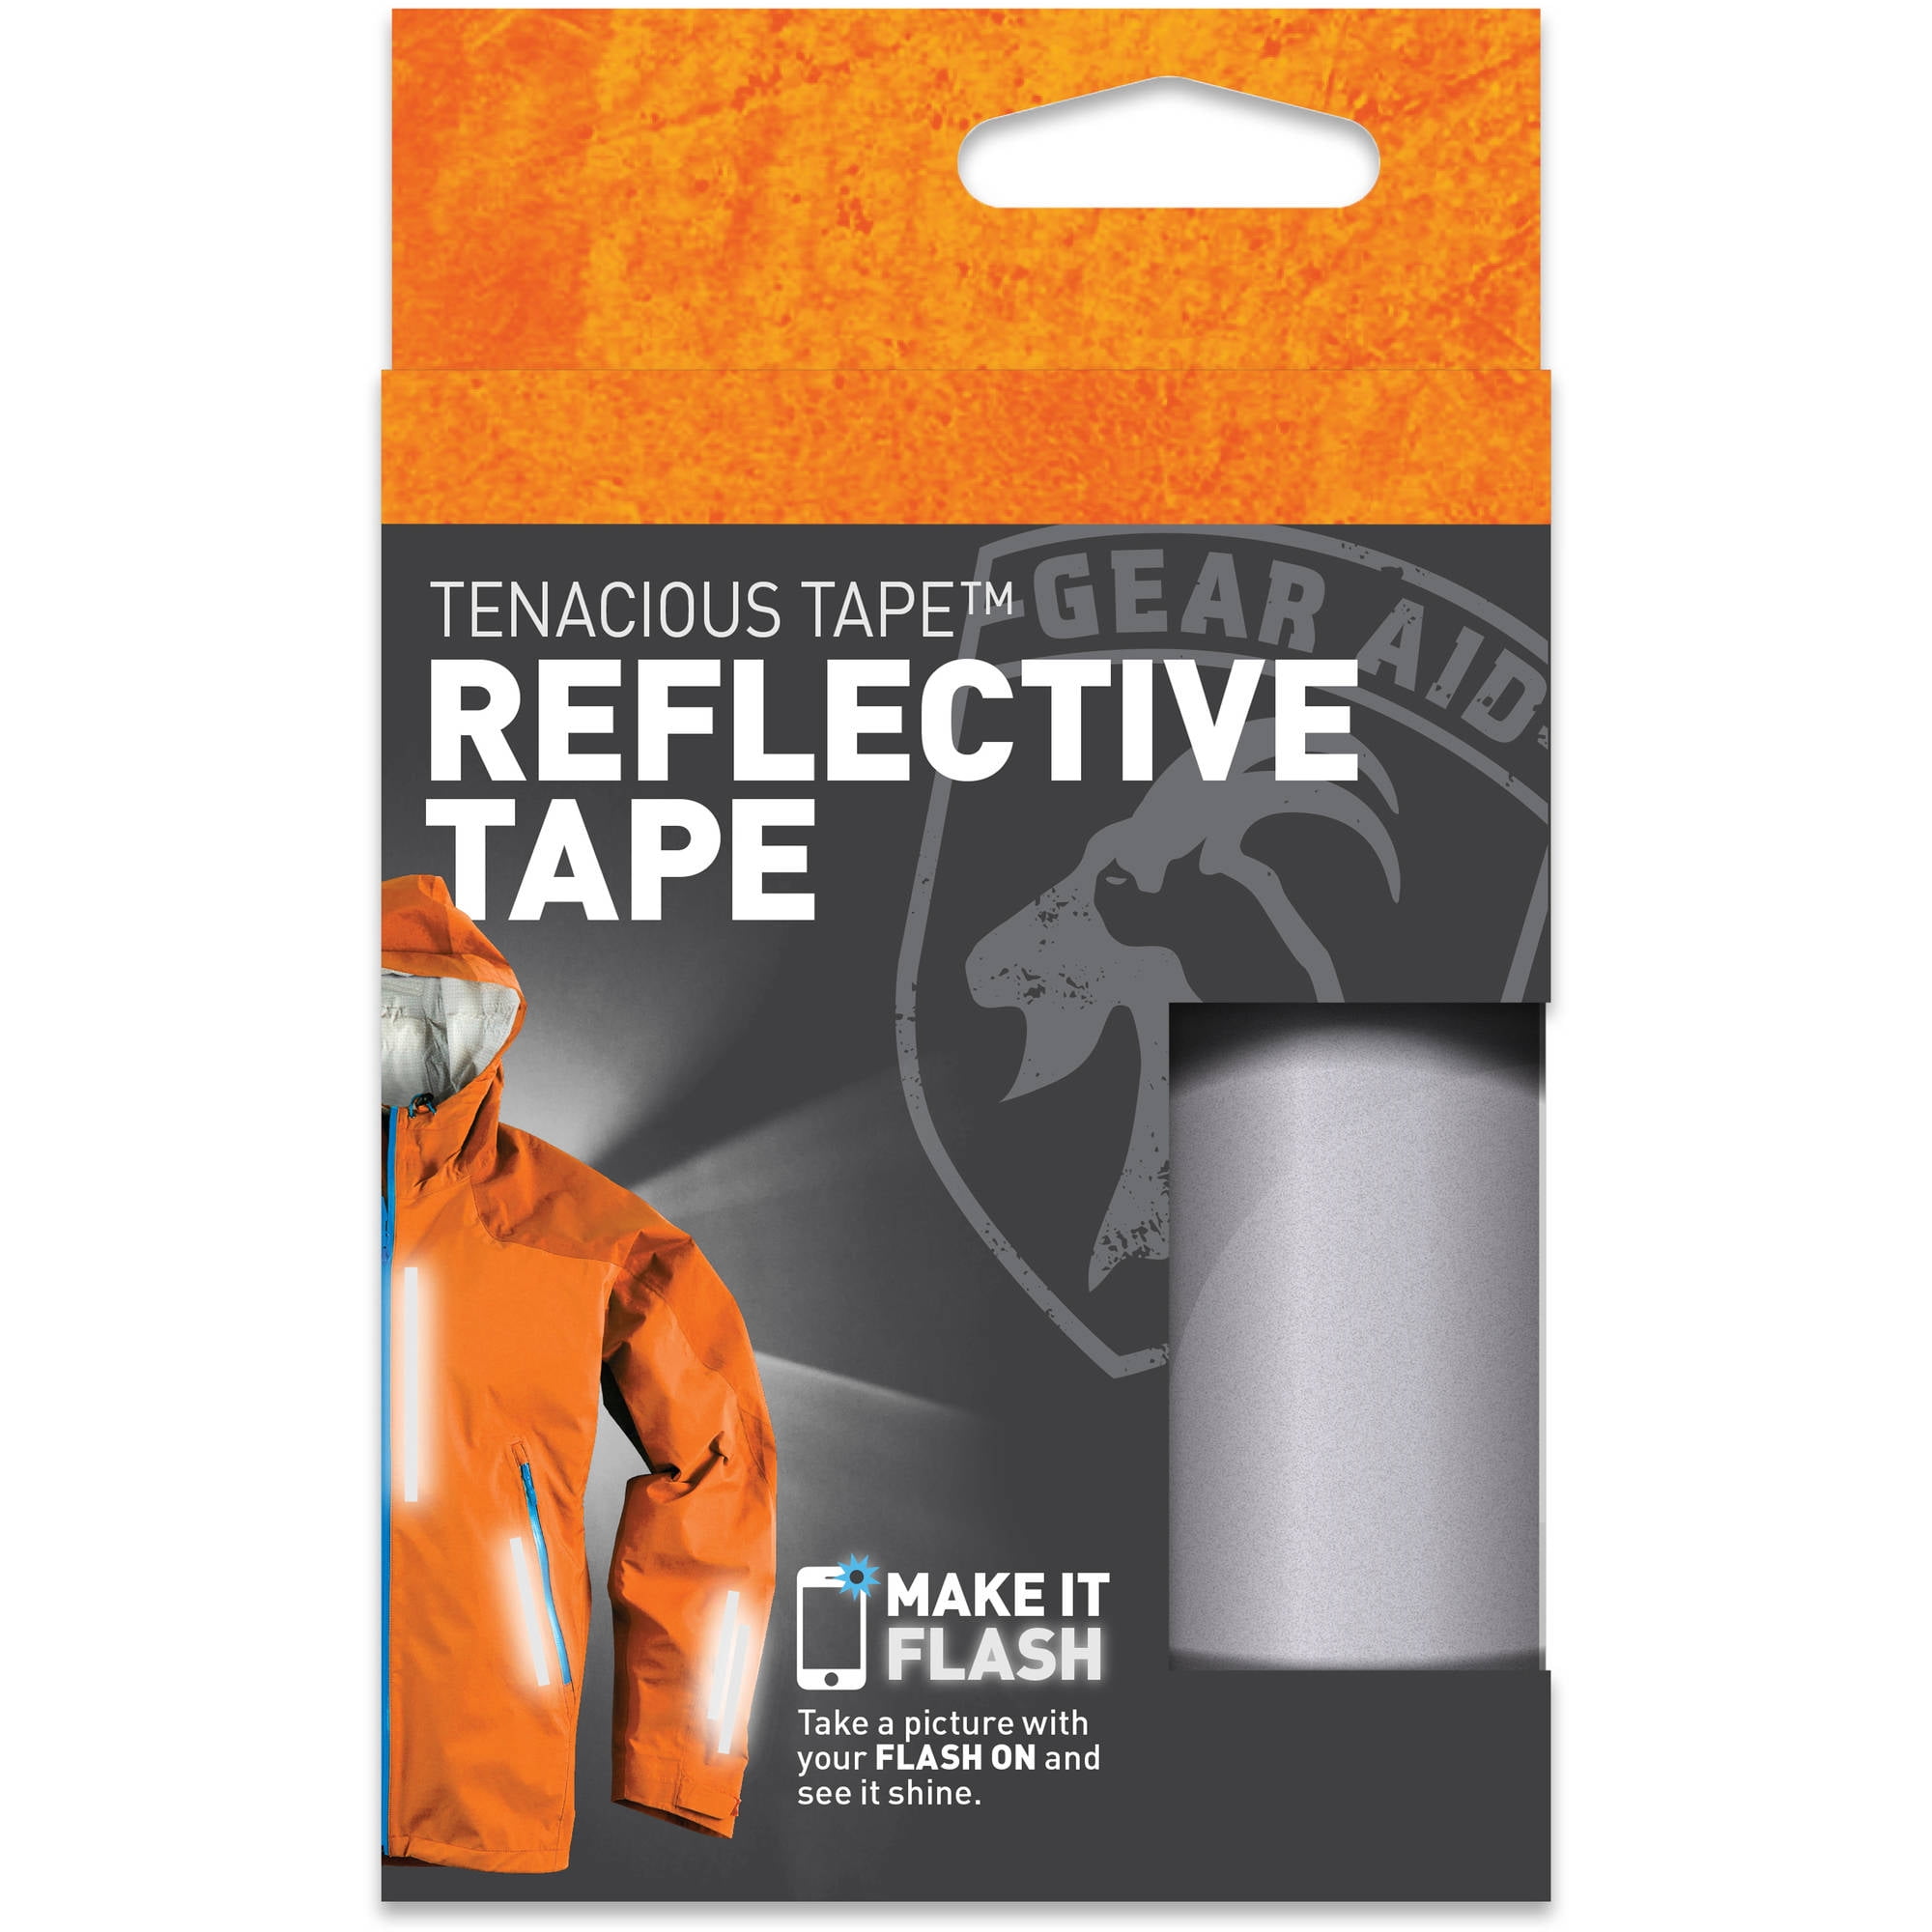 Gear Aid Tenacious Tape 3 x 20 No-Sew Peel and Stick Reflective Tape